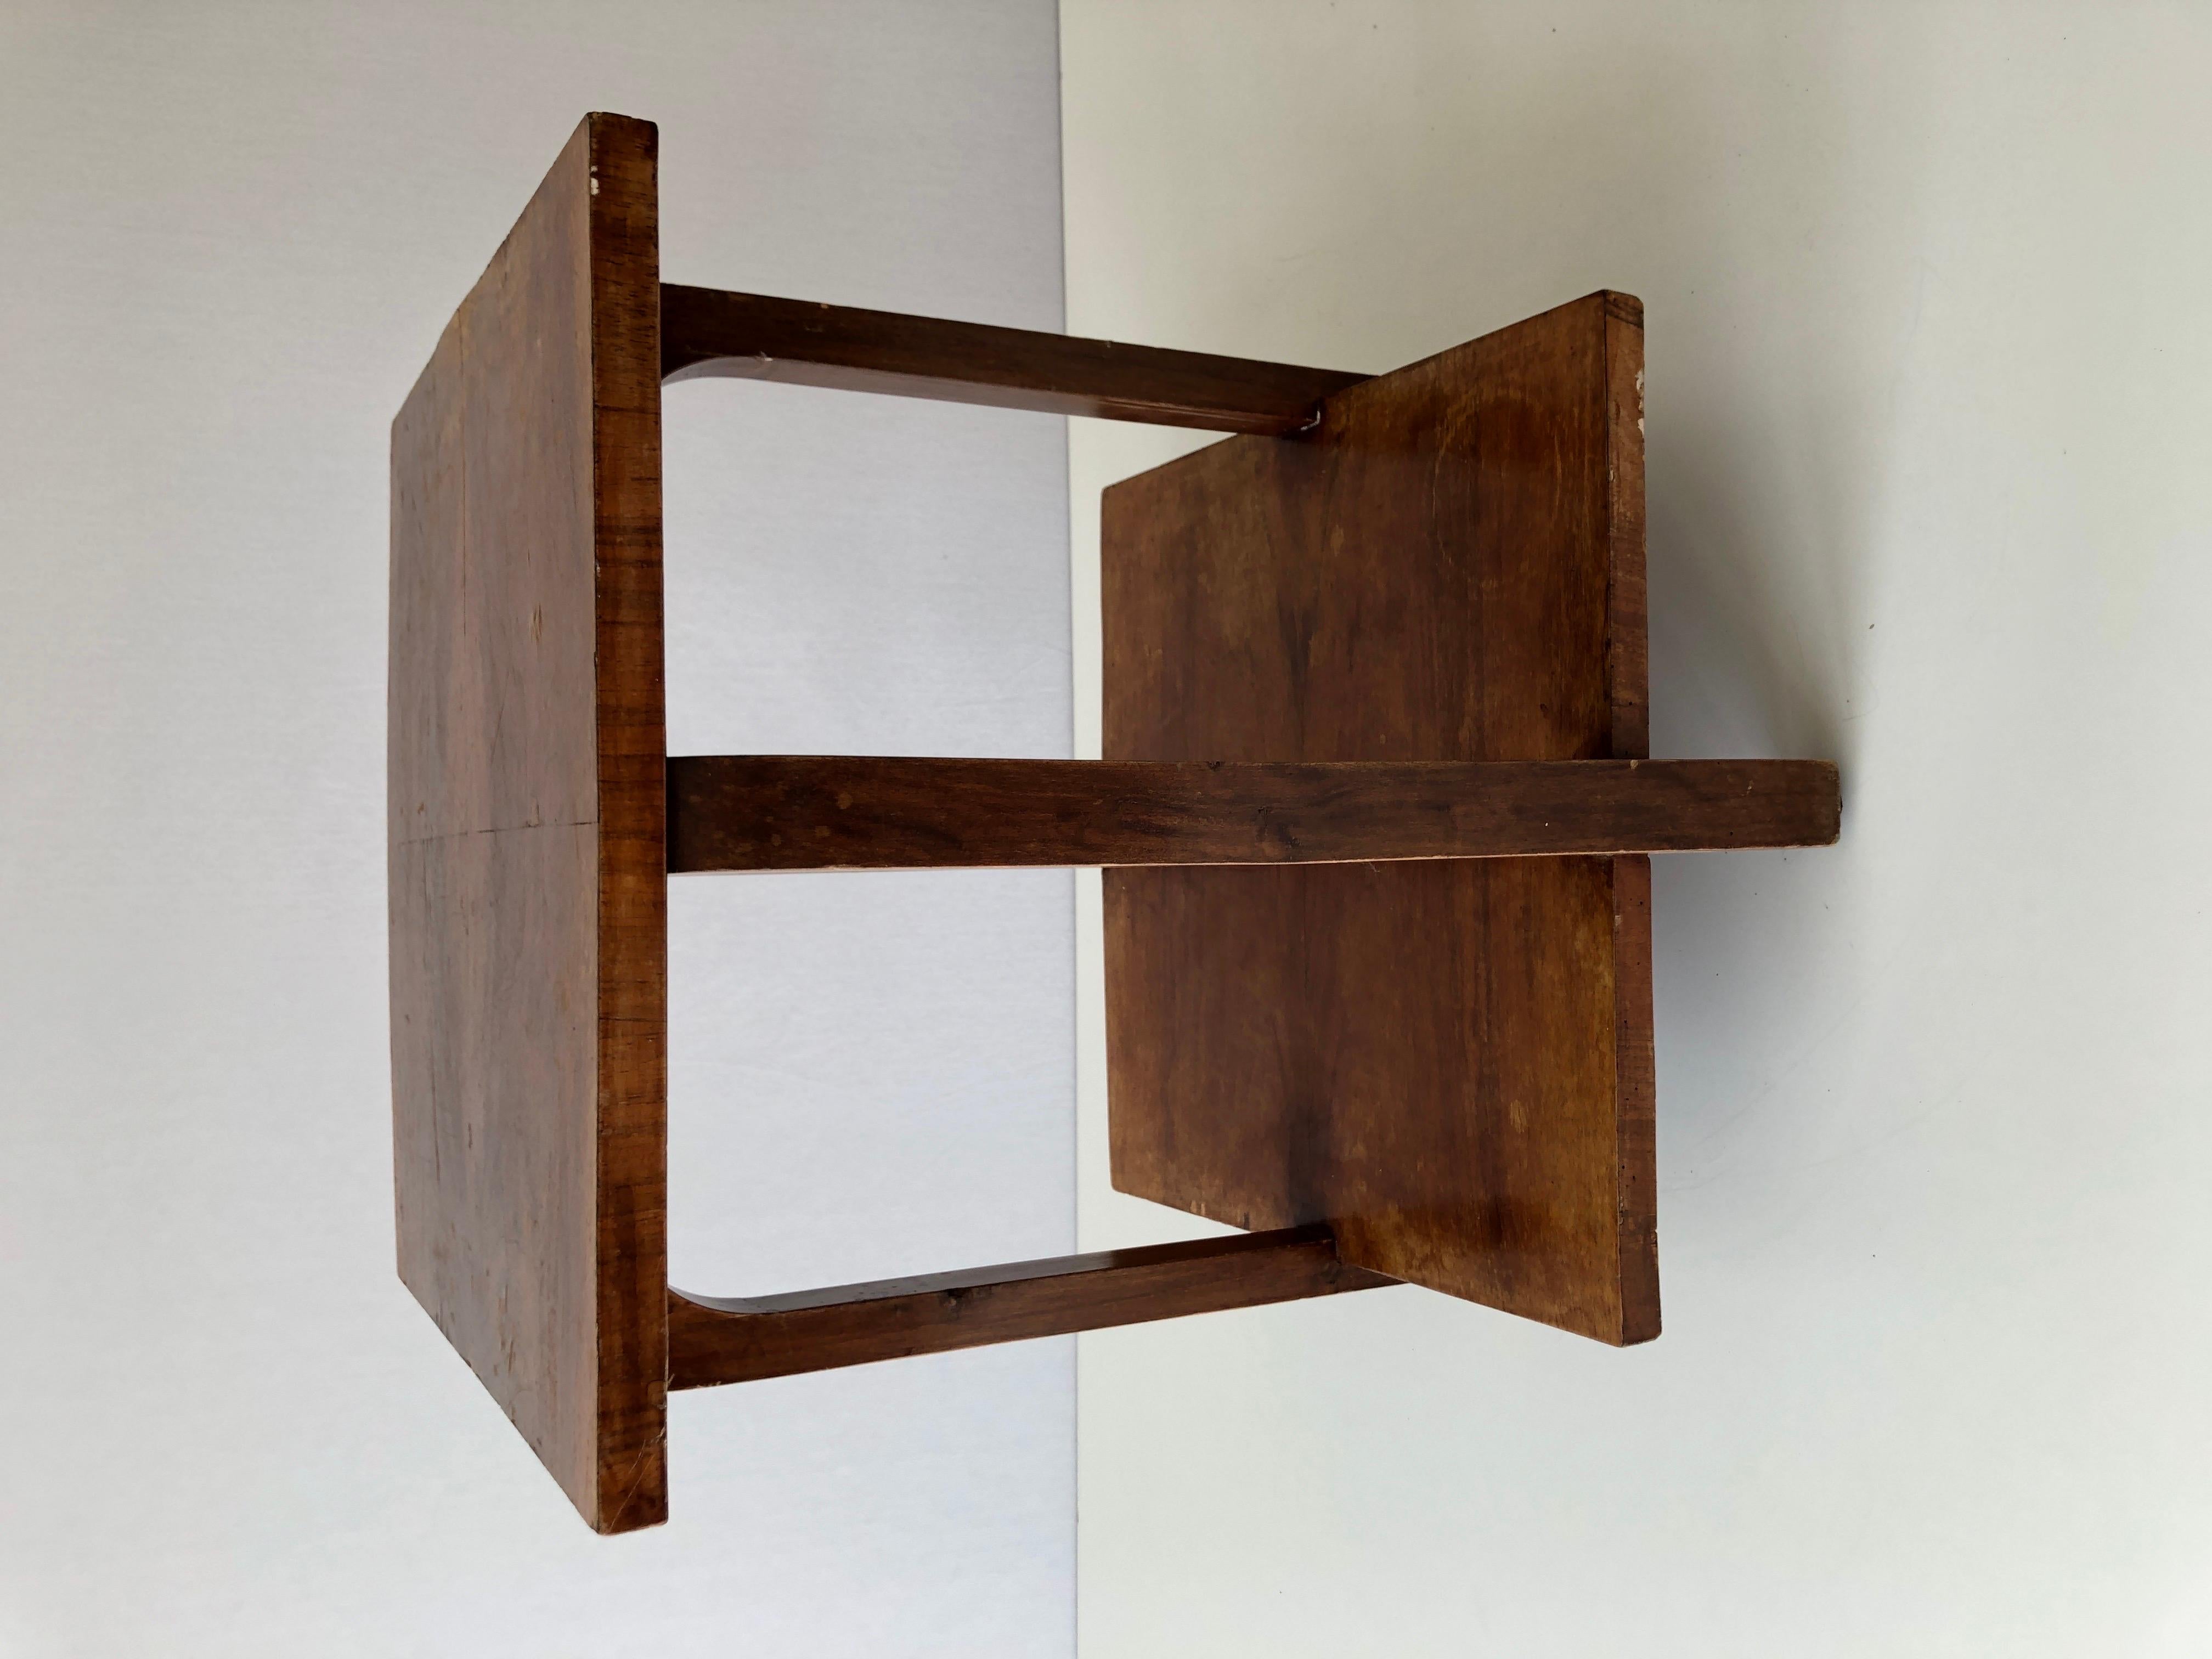 Mid-20th Century Art Deco Square Wood Corner or End Table, 1940s, Made in Italy For Sale